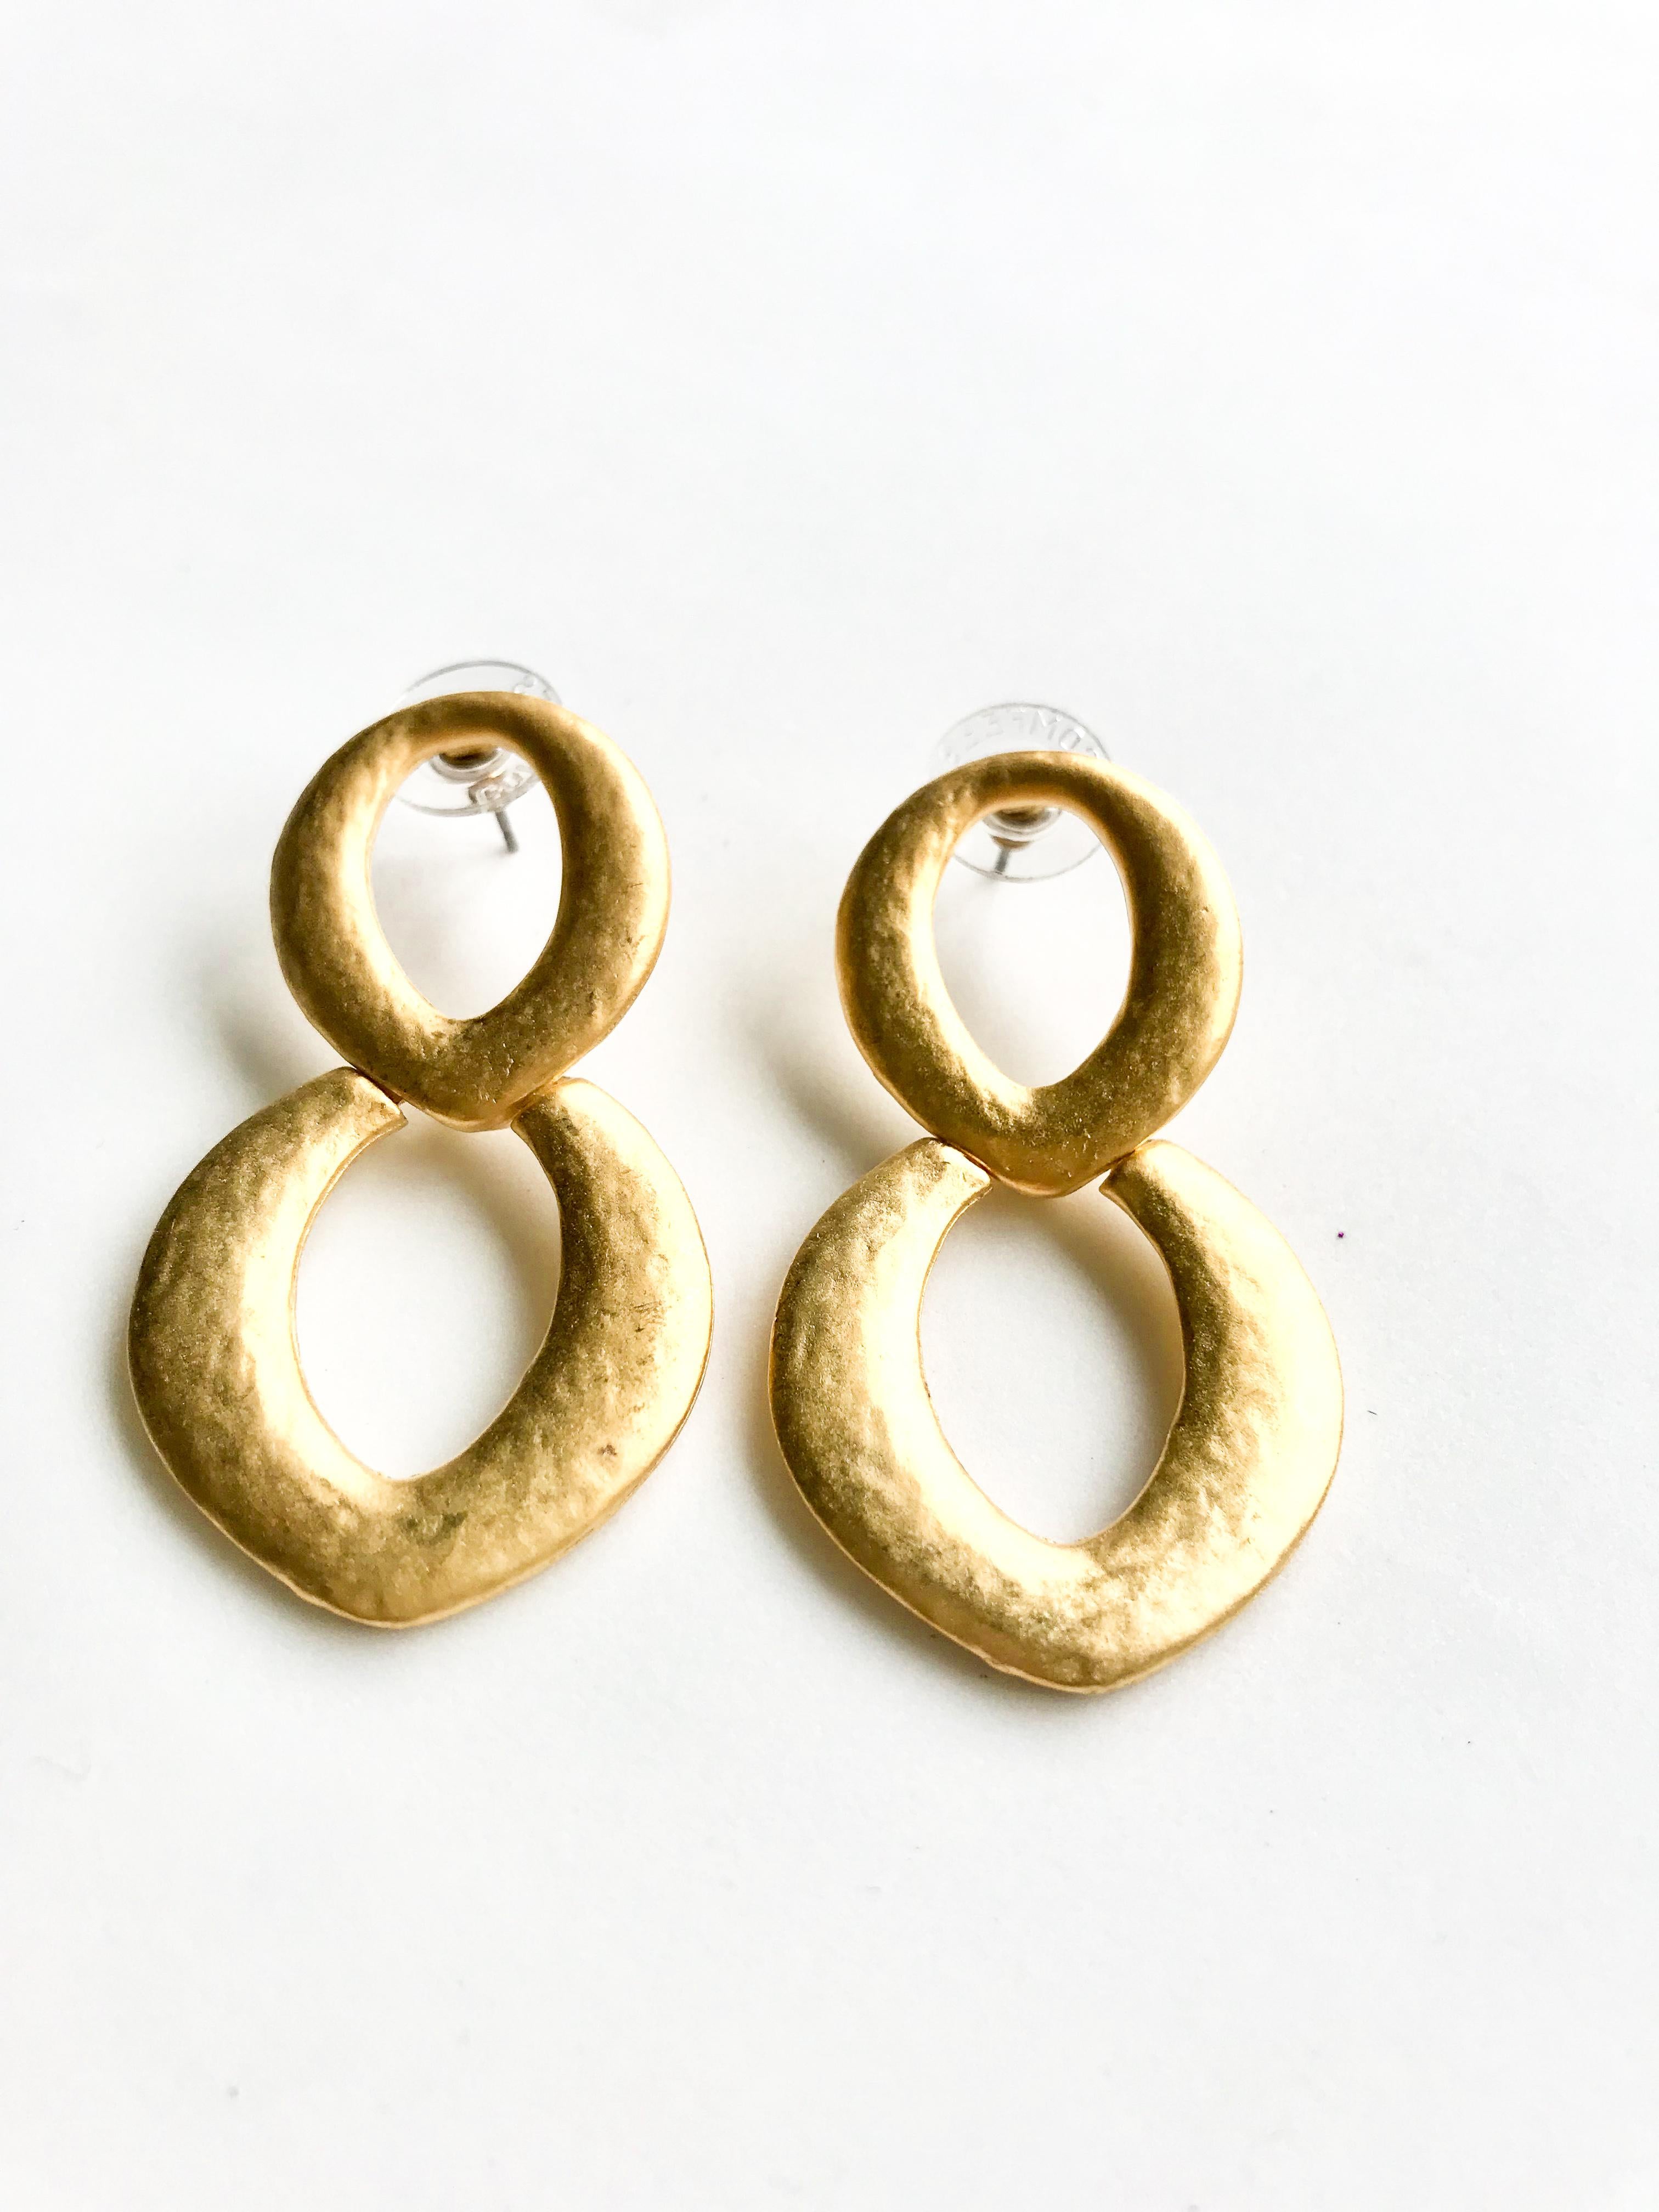 Kenneth Jay Lane Couture Collection Gold Tone Earrings

New and unworn.

2 inches long x 1 2/8 inches wide